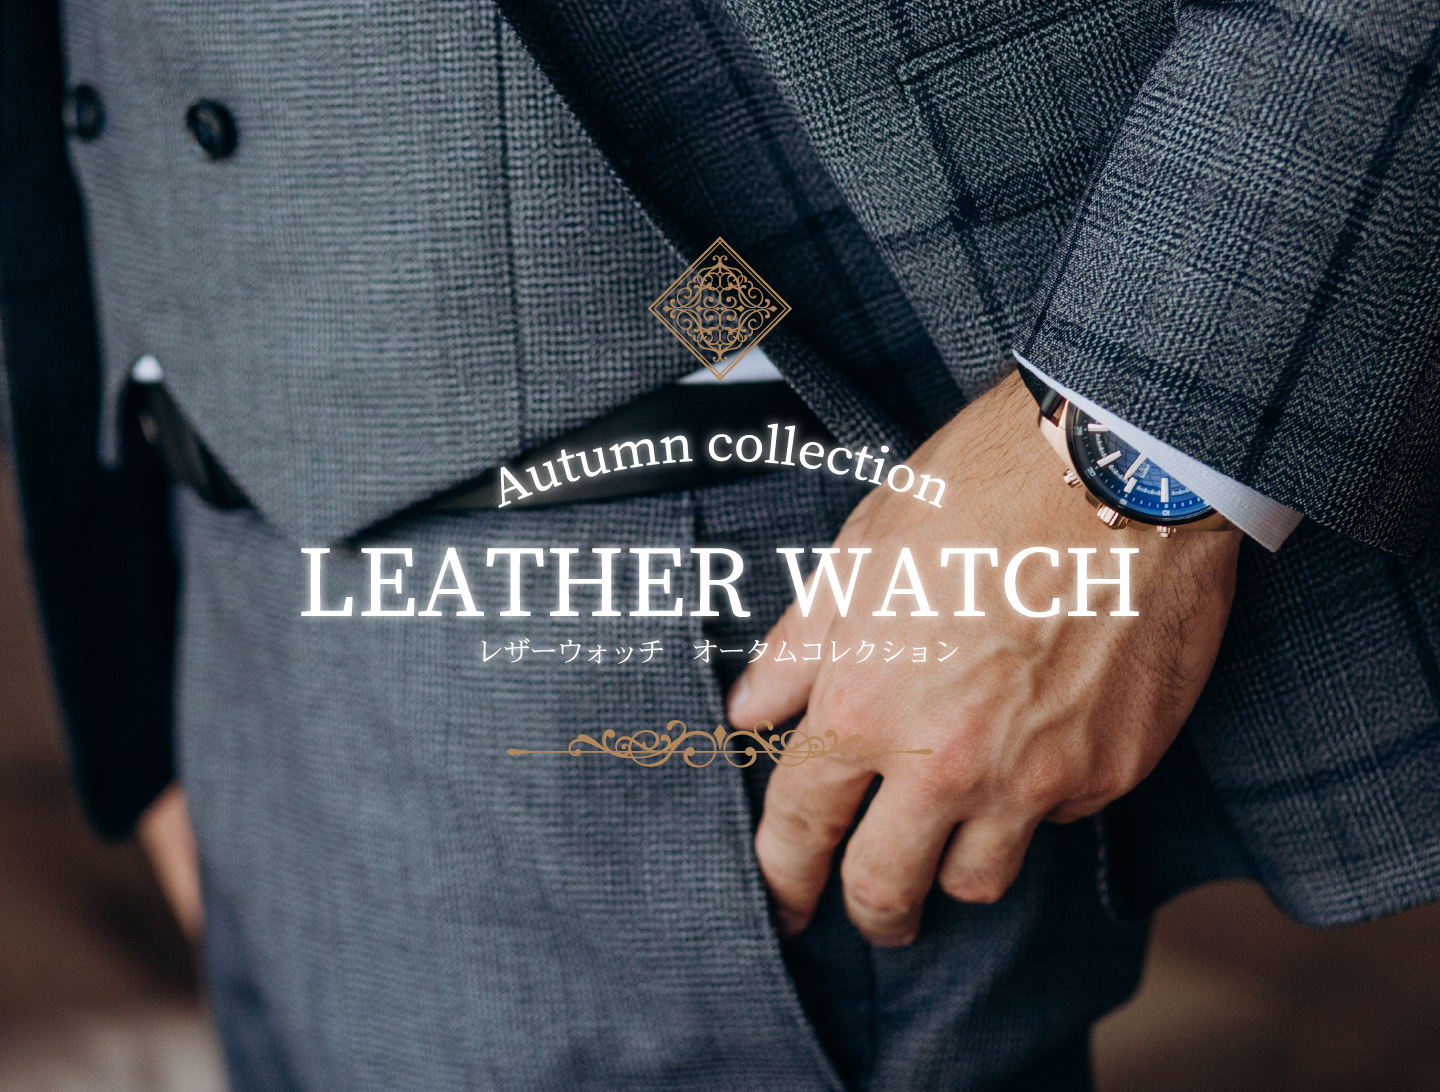 Leather Watch Autumn Collection